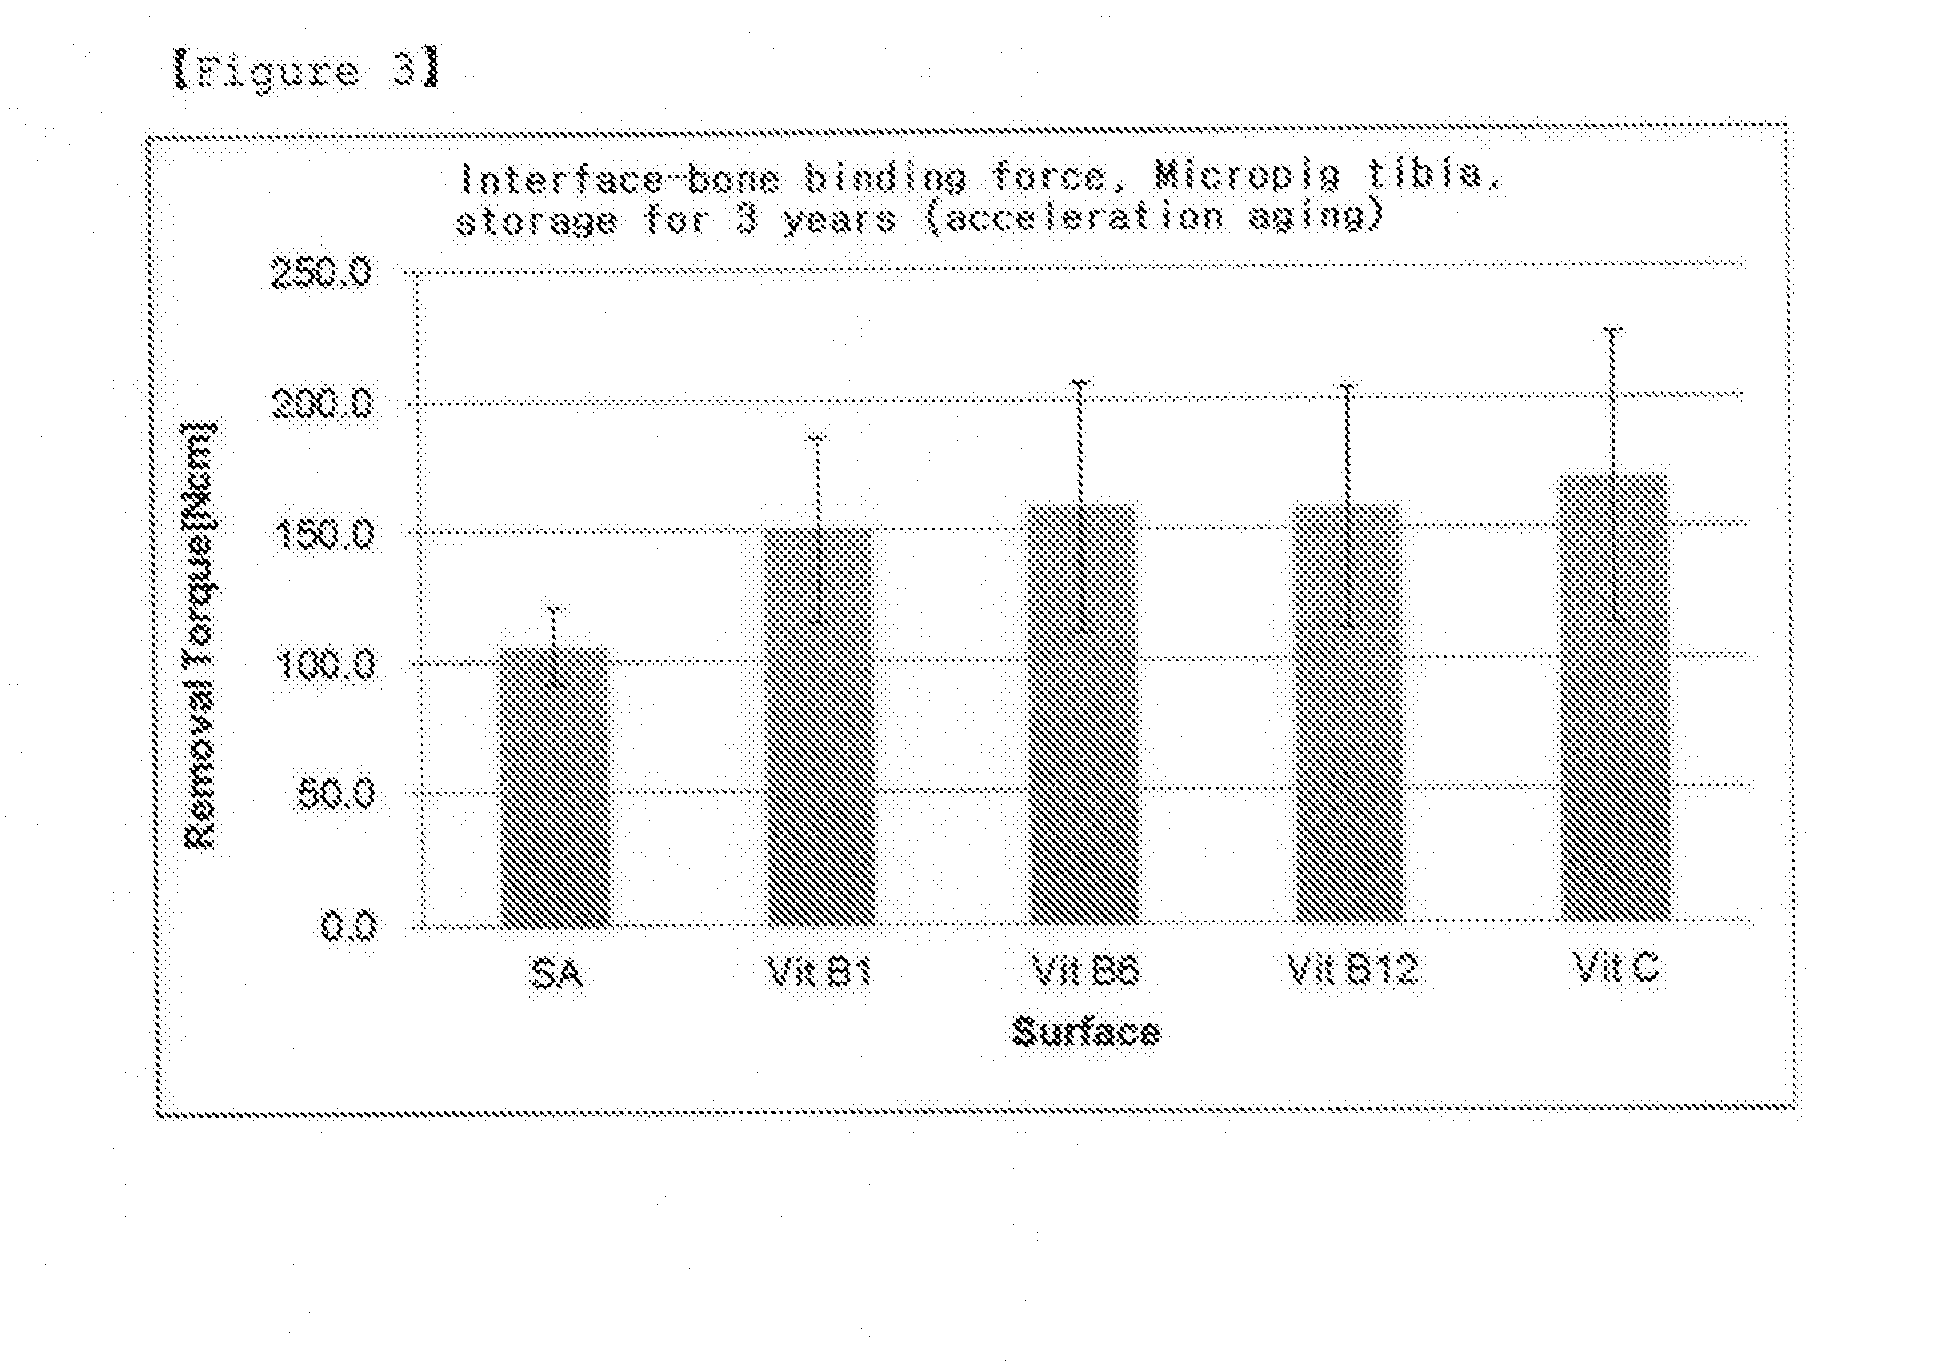 Implant coating material for enhancing a bioactivity and osseointegration of implant surface, and the method for manufacturing and storing the same